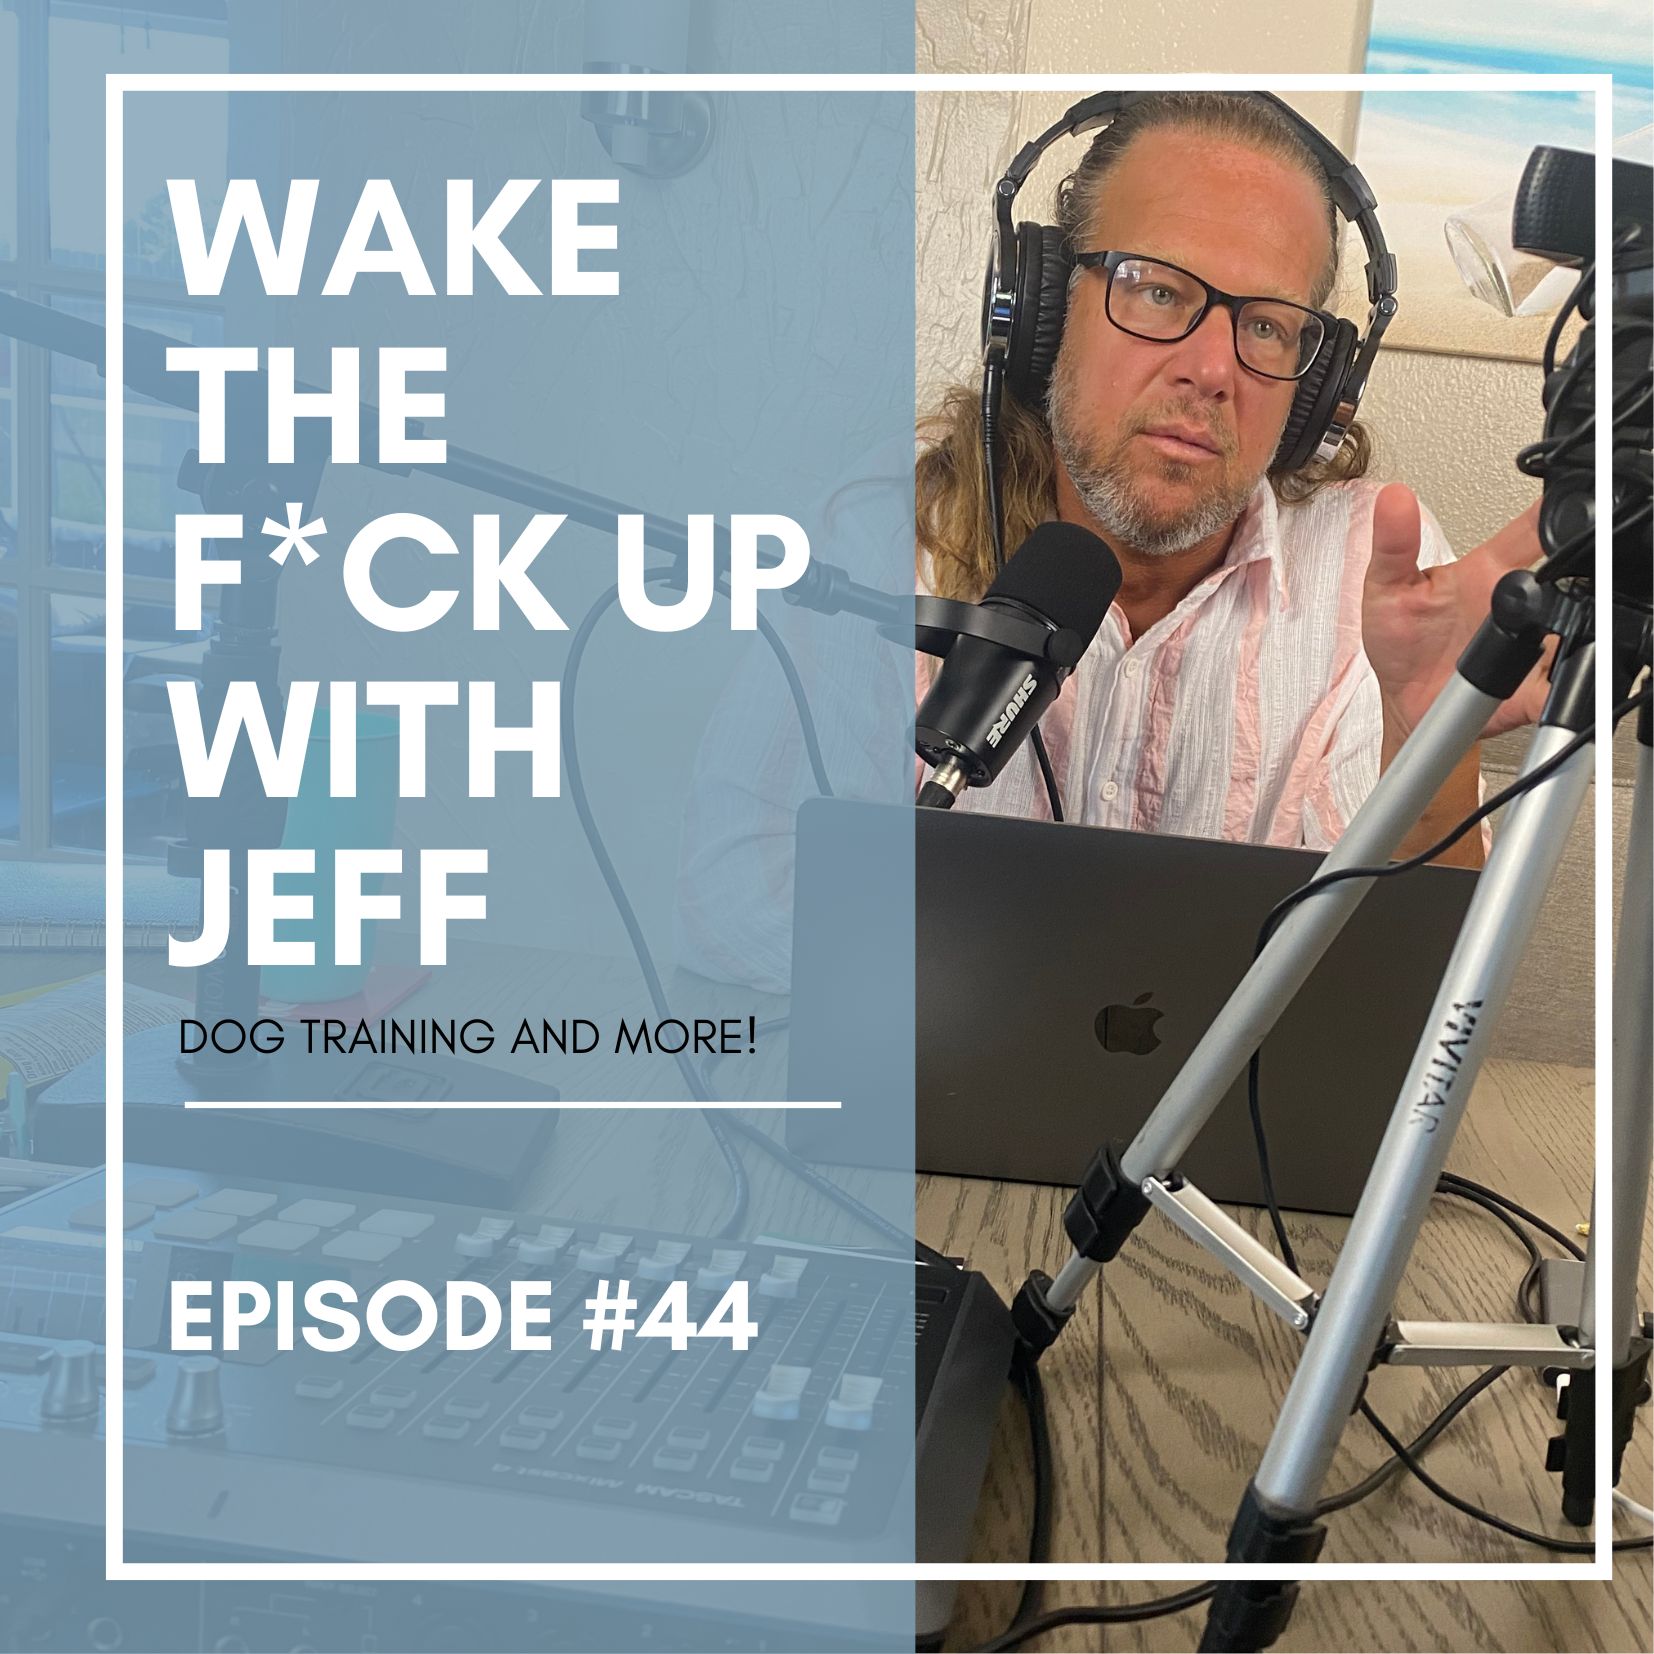 Wake the F#CK up w/JEFF #44 are ecollars shortcuts